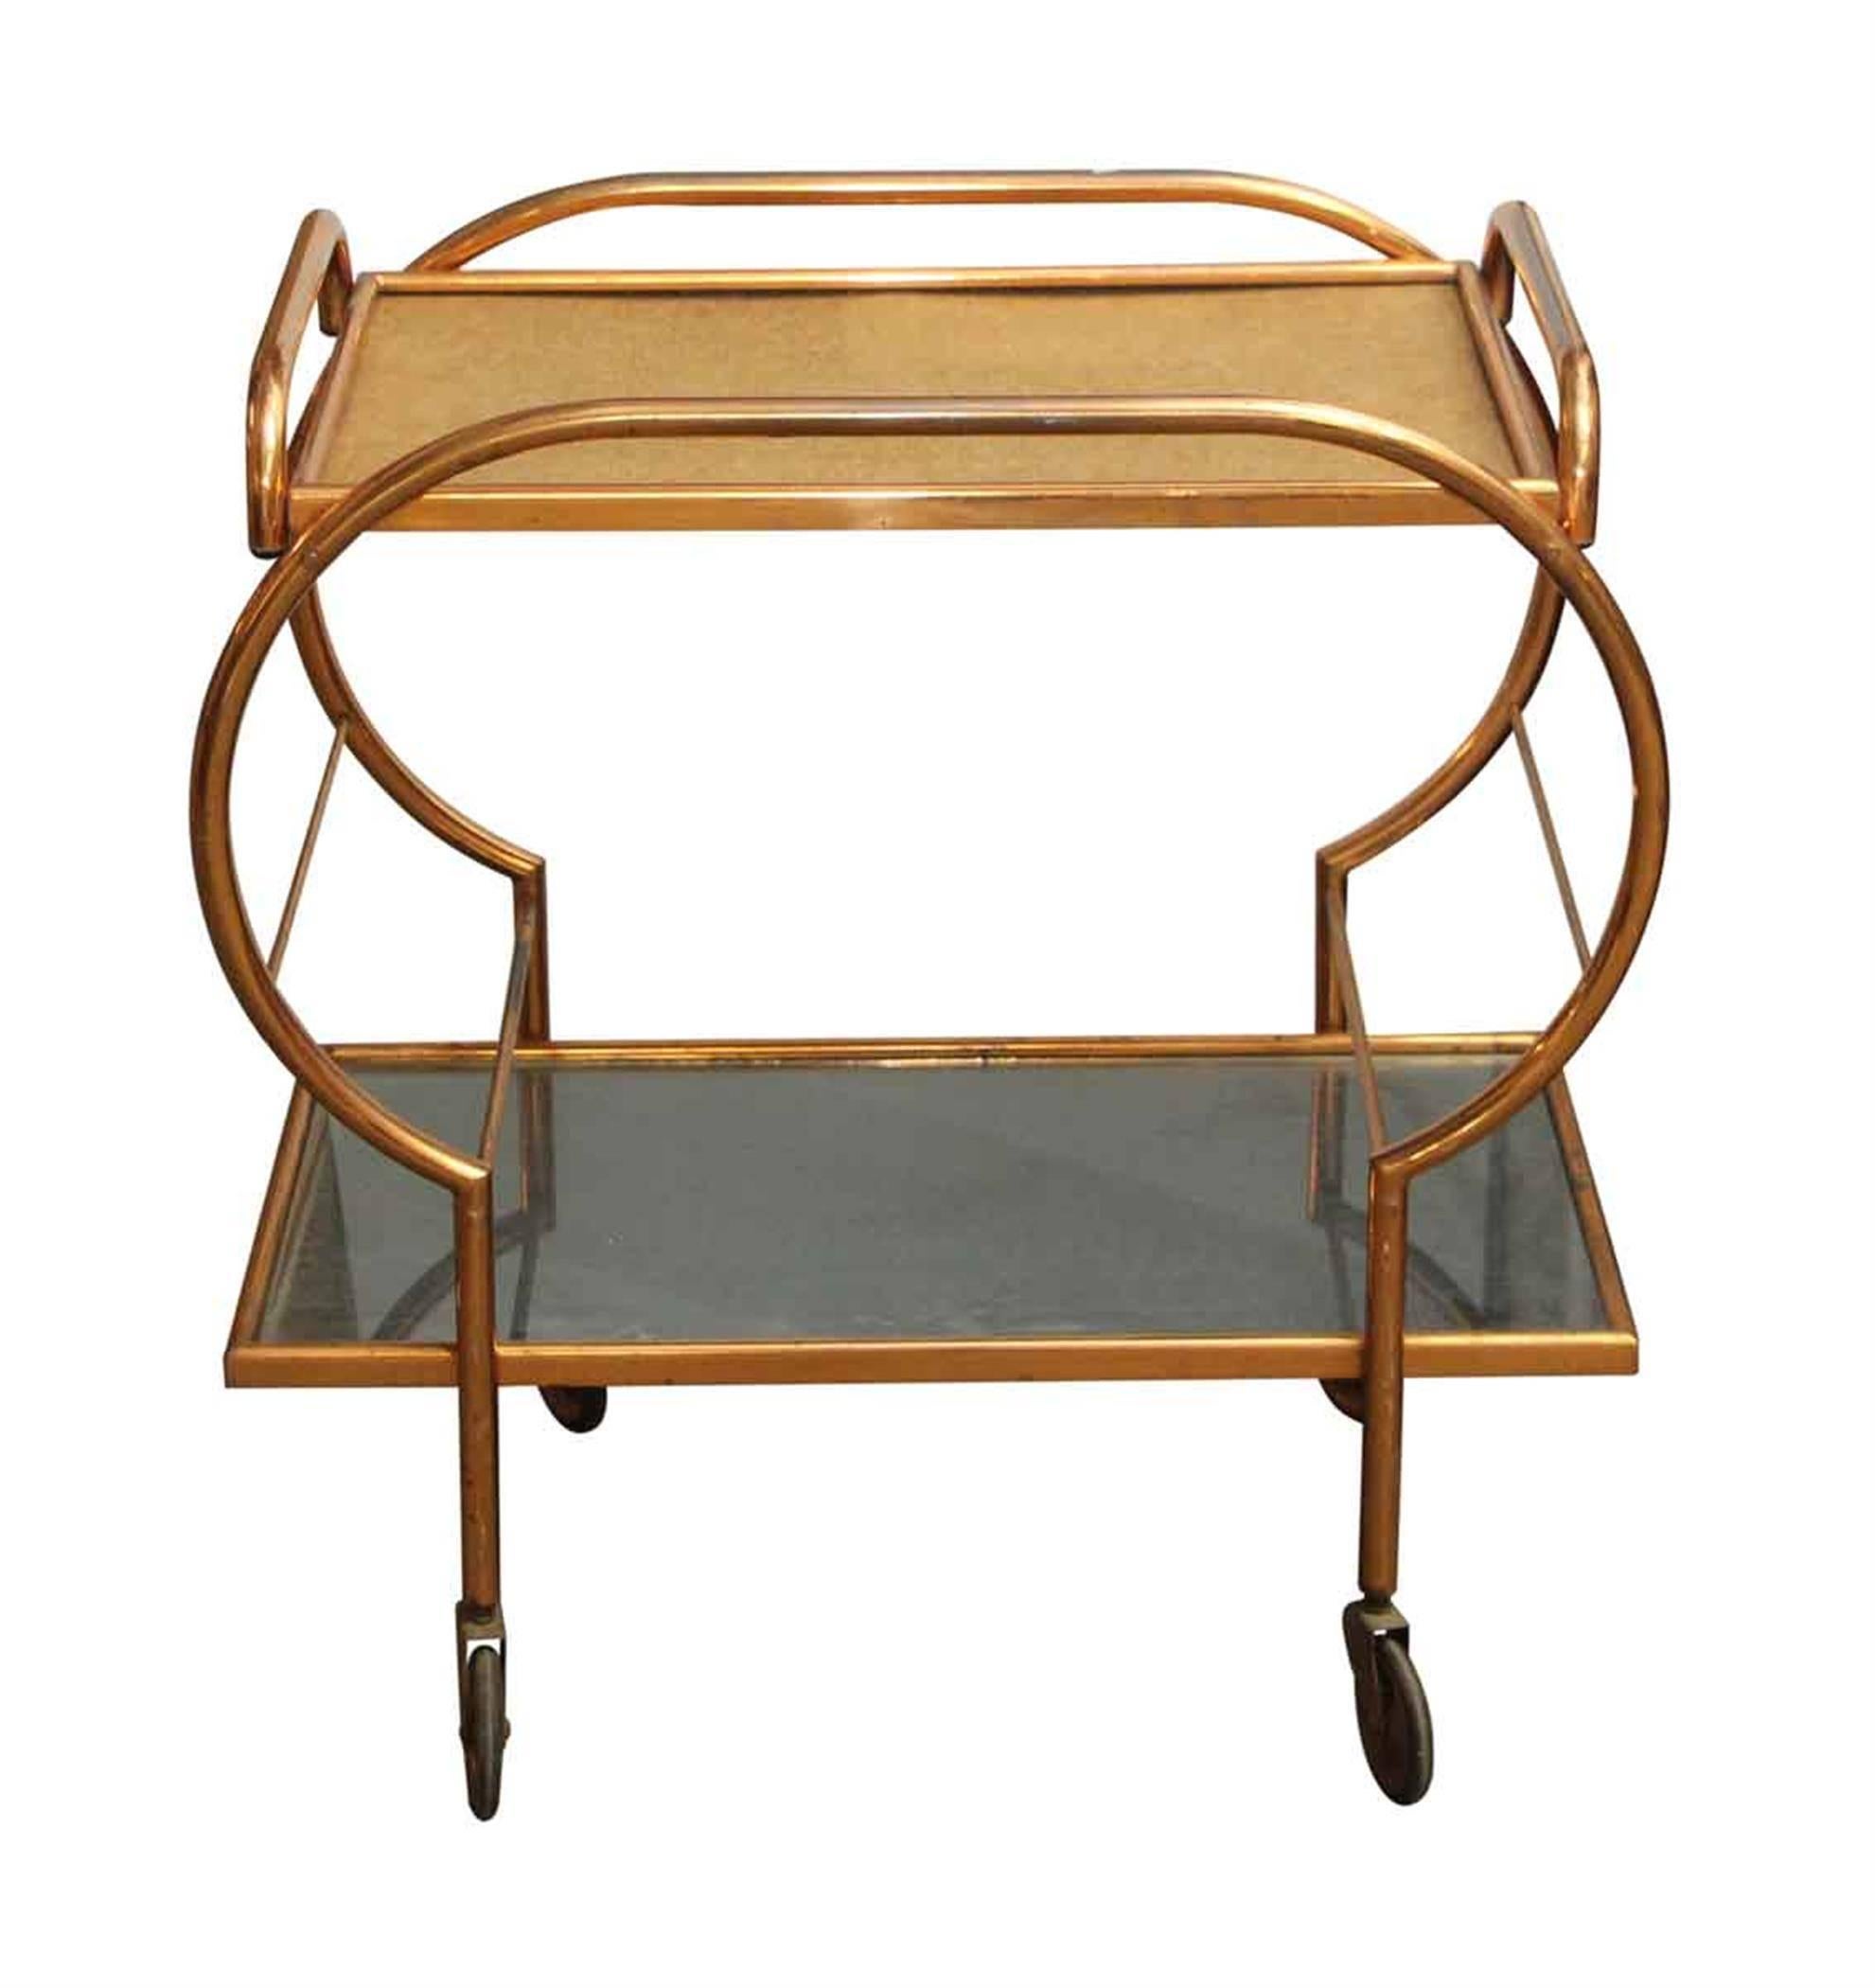 Vintage Mid-Century Modern style bar cart with a copper wash and removable top tray, 1970s, France. This can be seen at our 302 Bowery location in Manhattan.